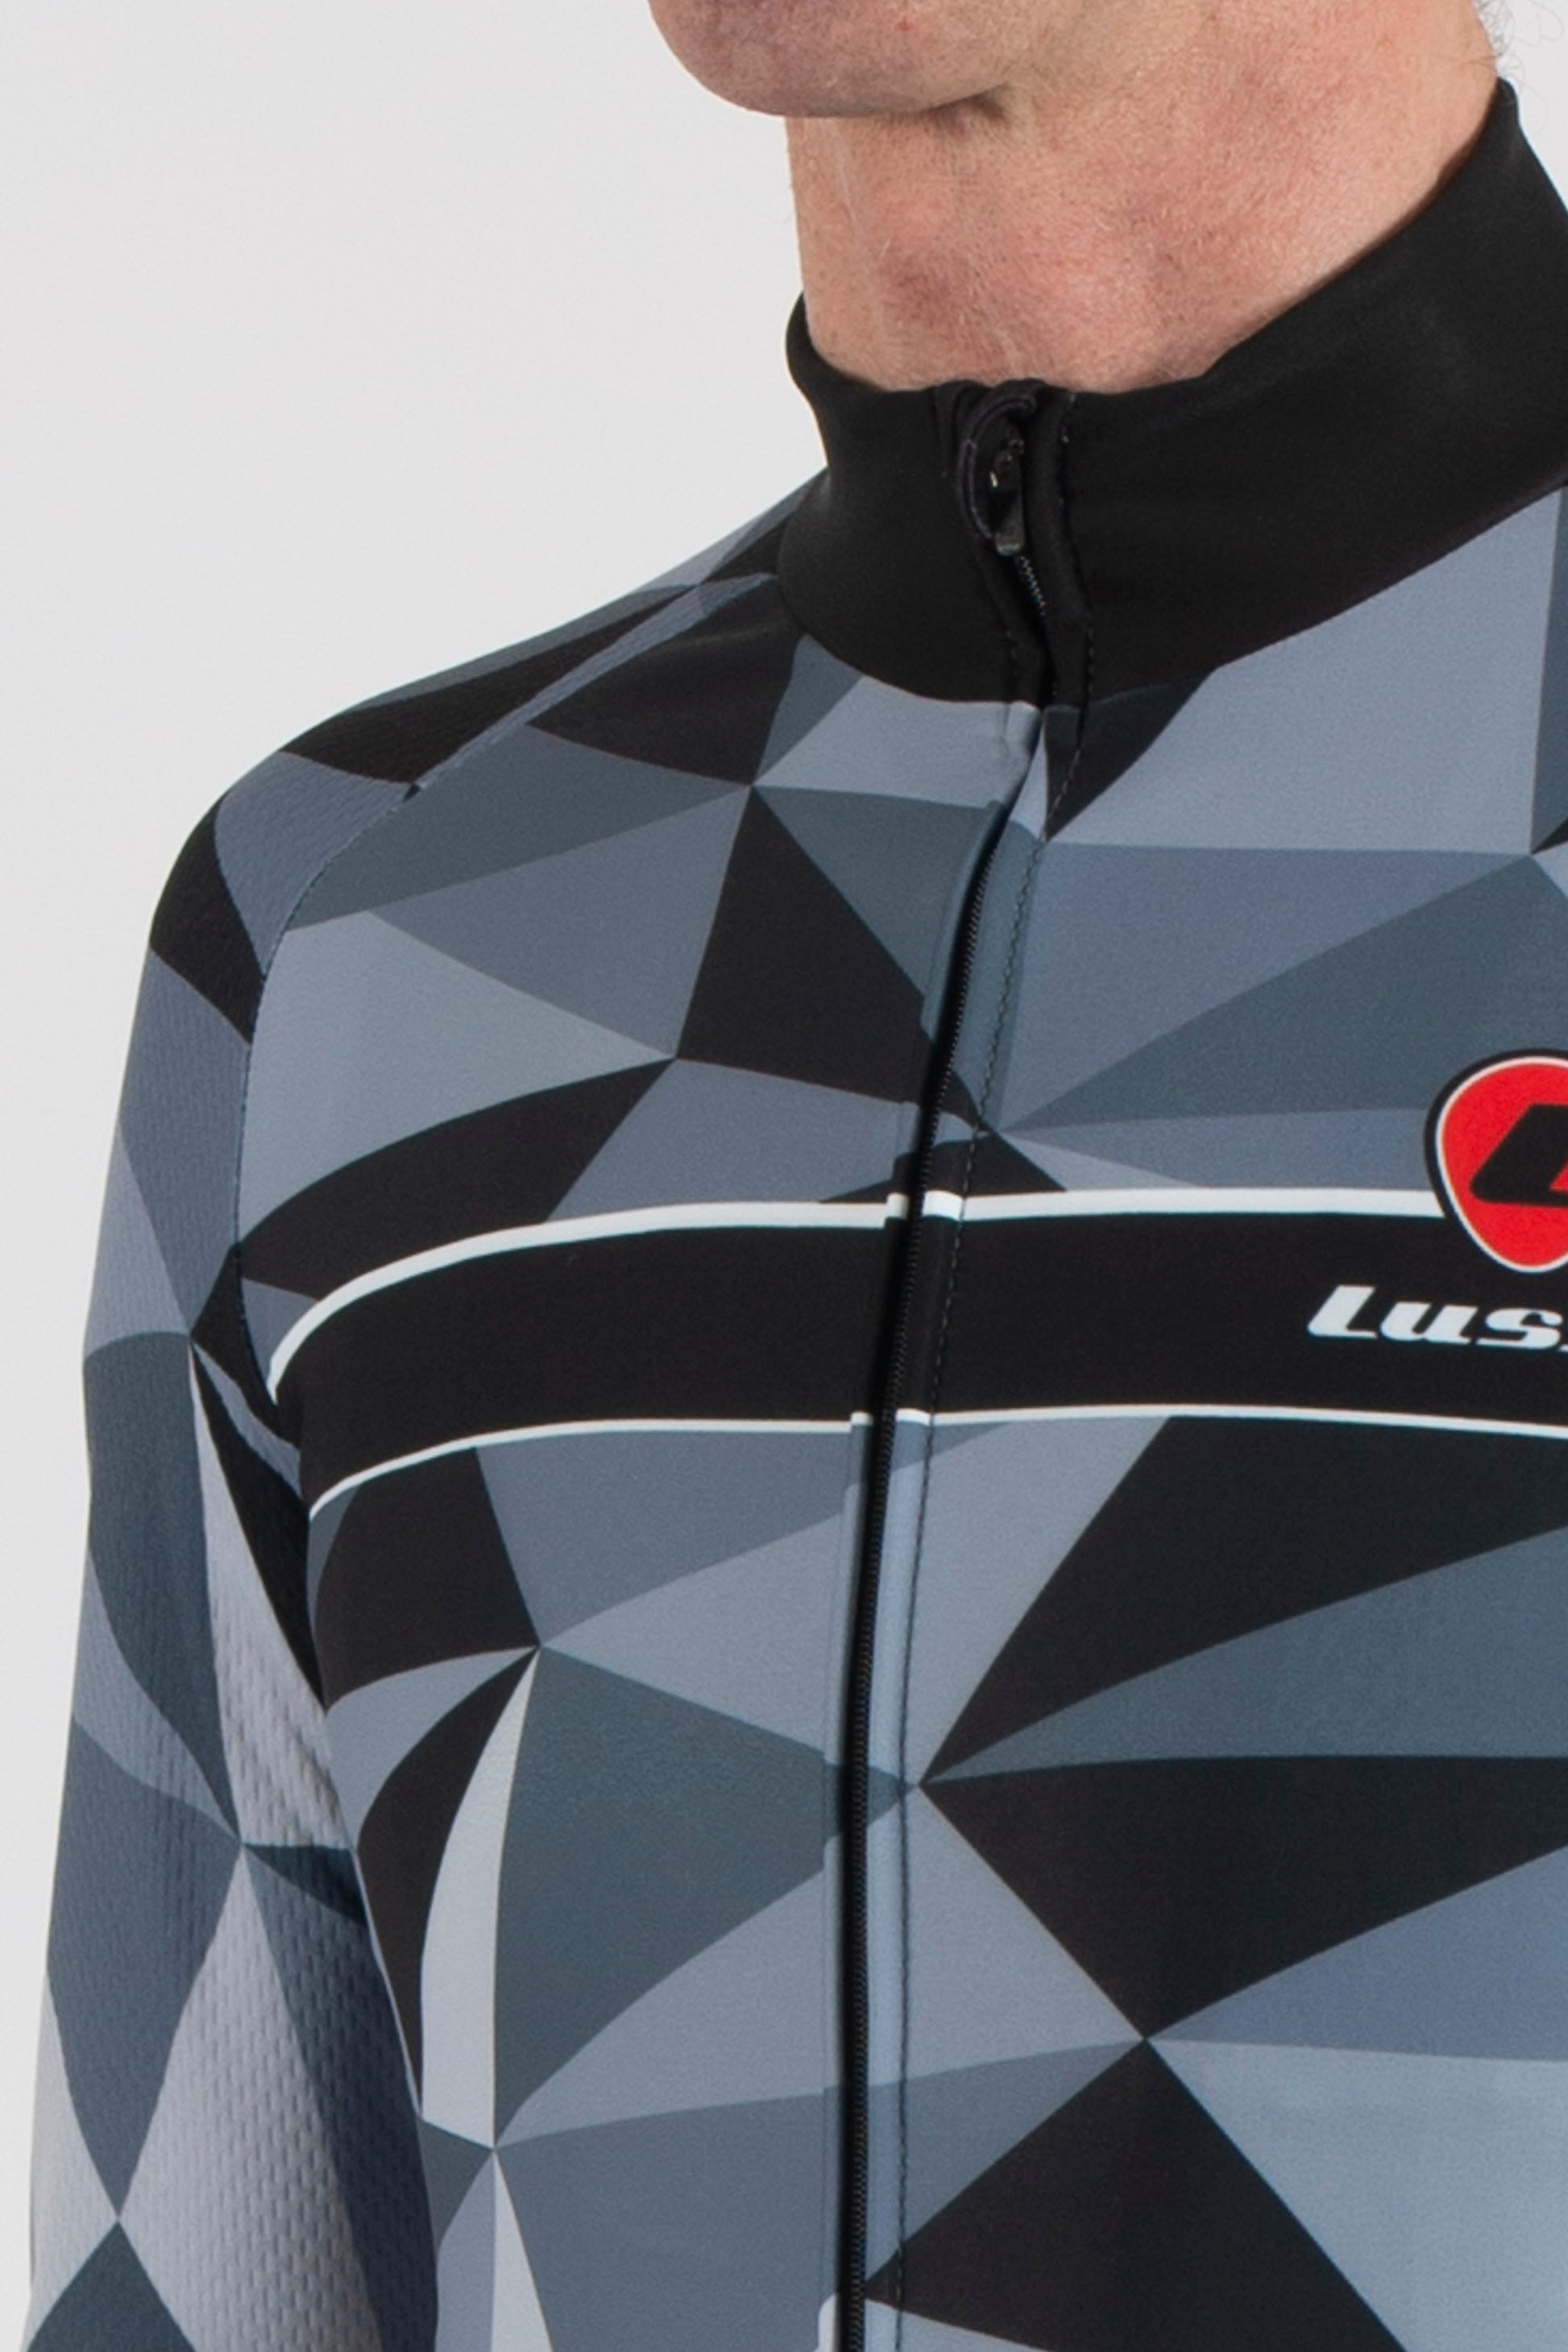 Shattered Grey Long Sleeve Jersey - Lusso Cycle Wear